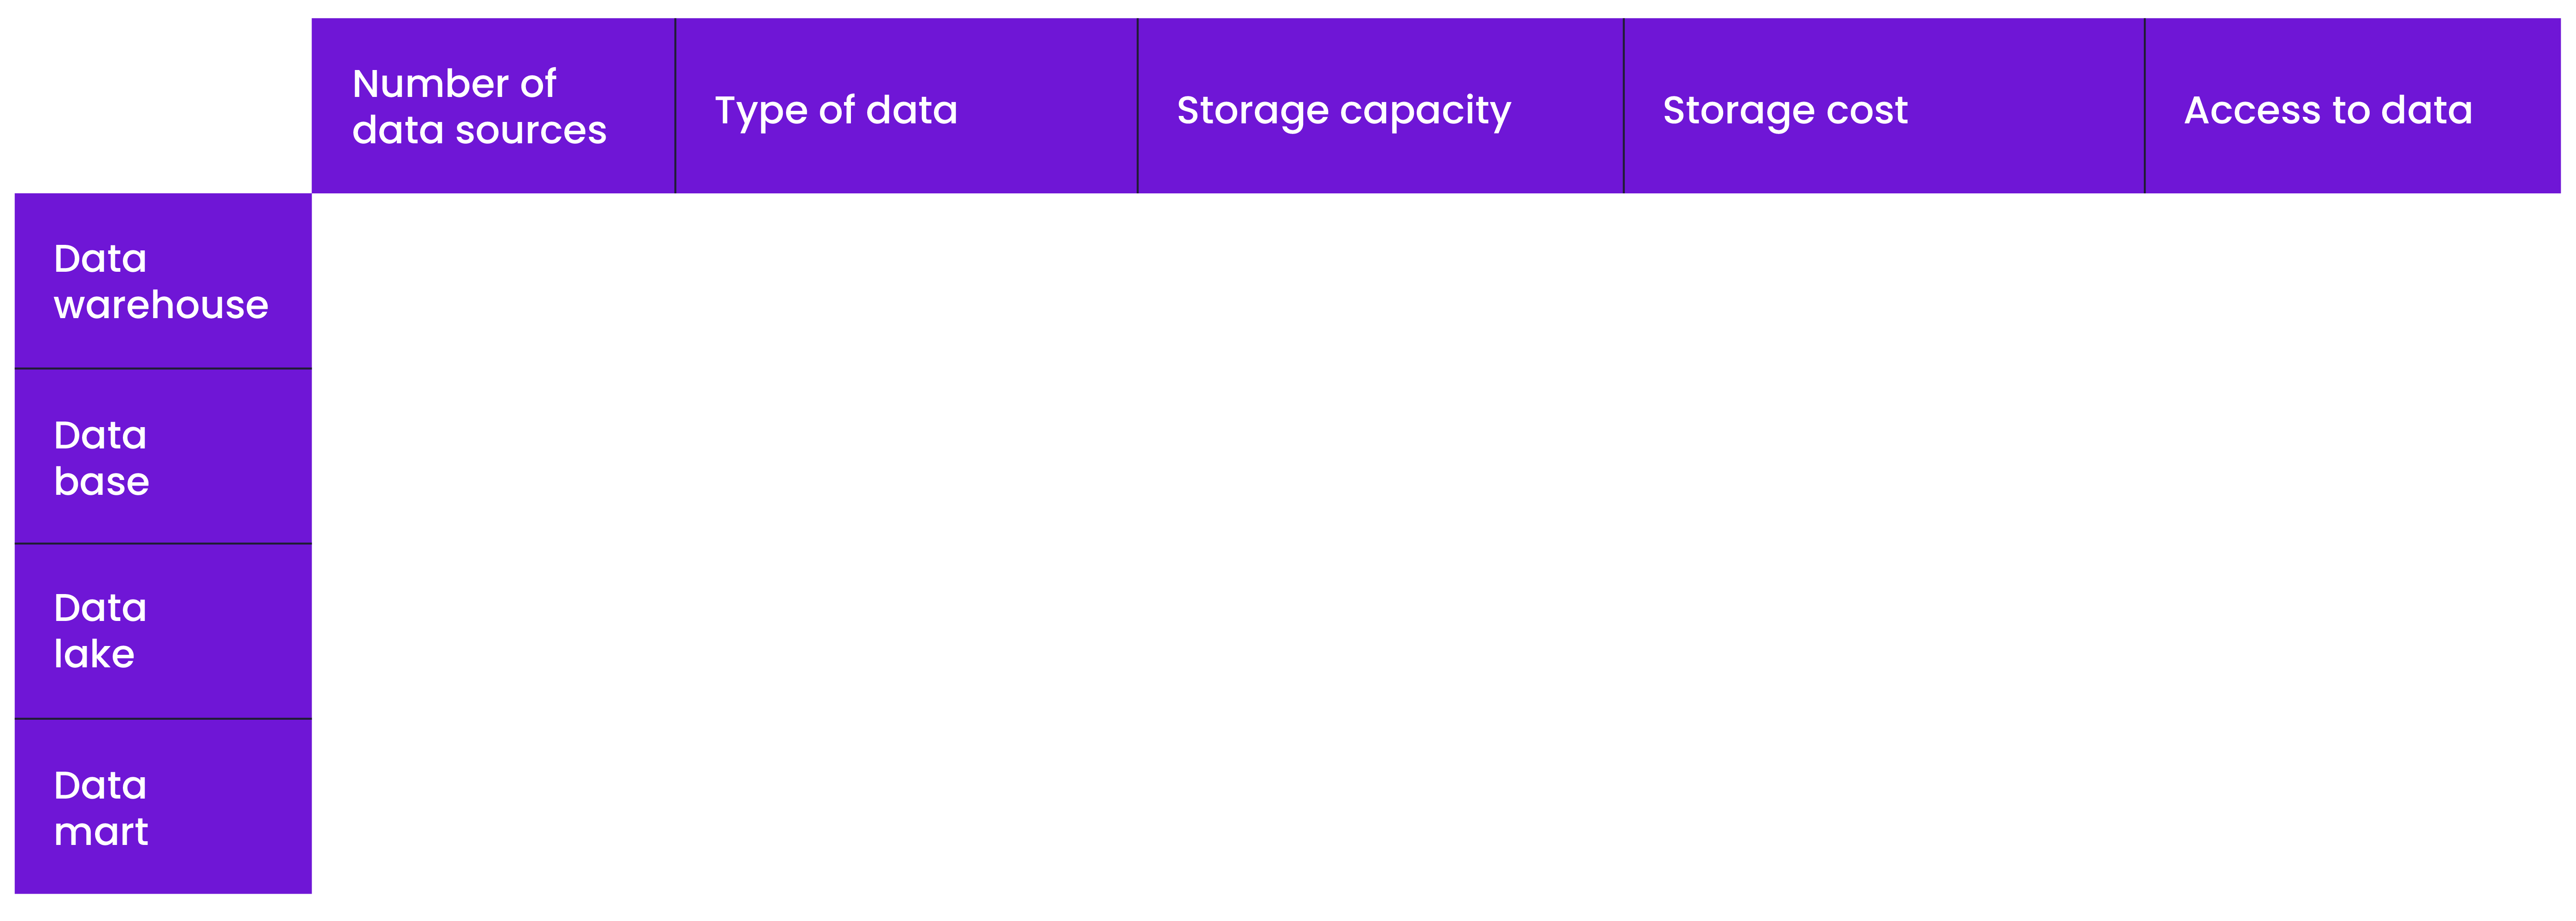 Comparison of Data Warehouse With Other Storage Options